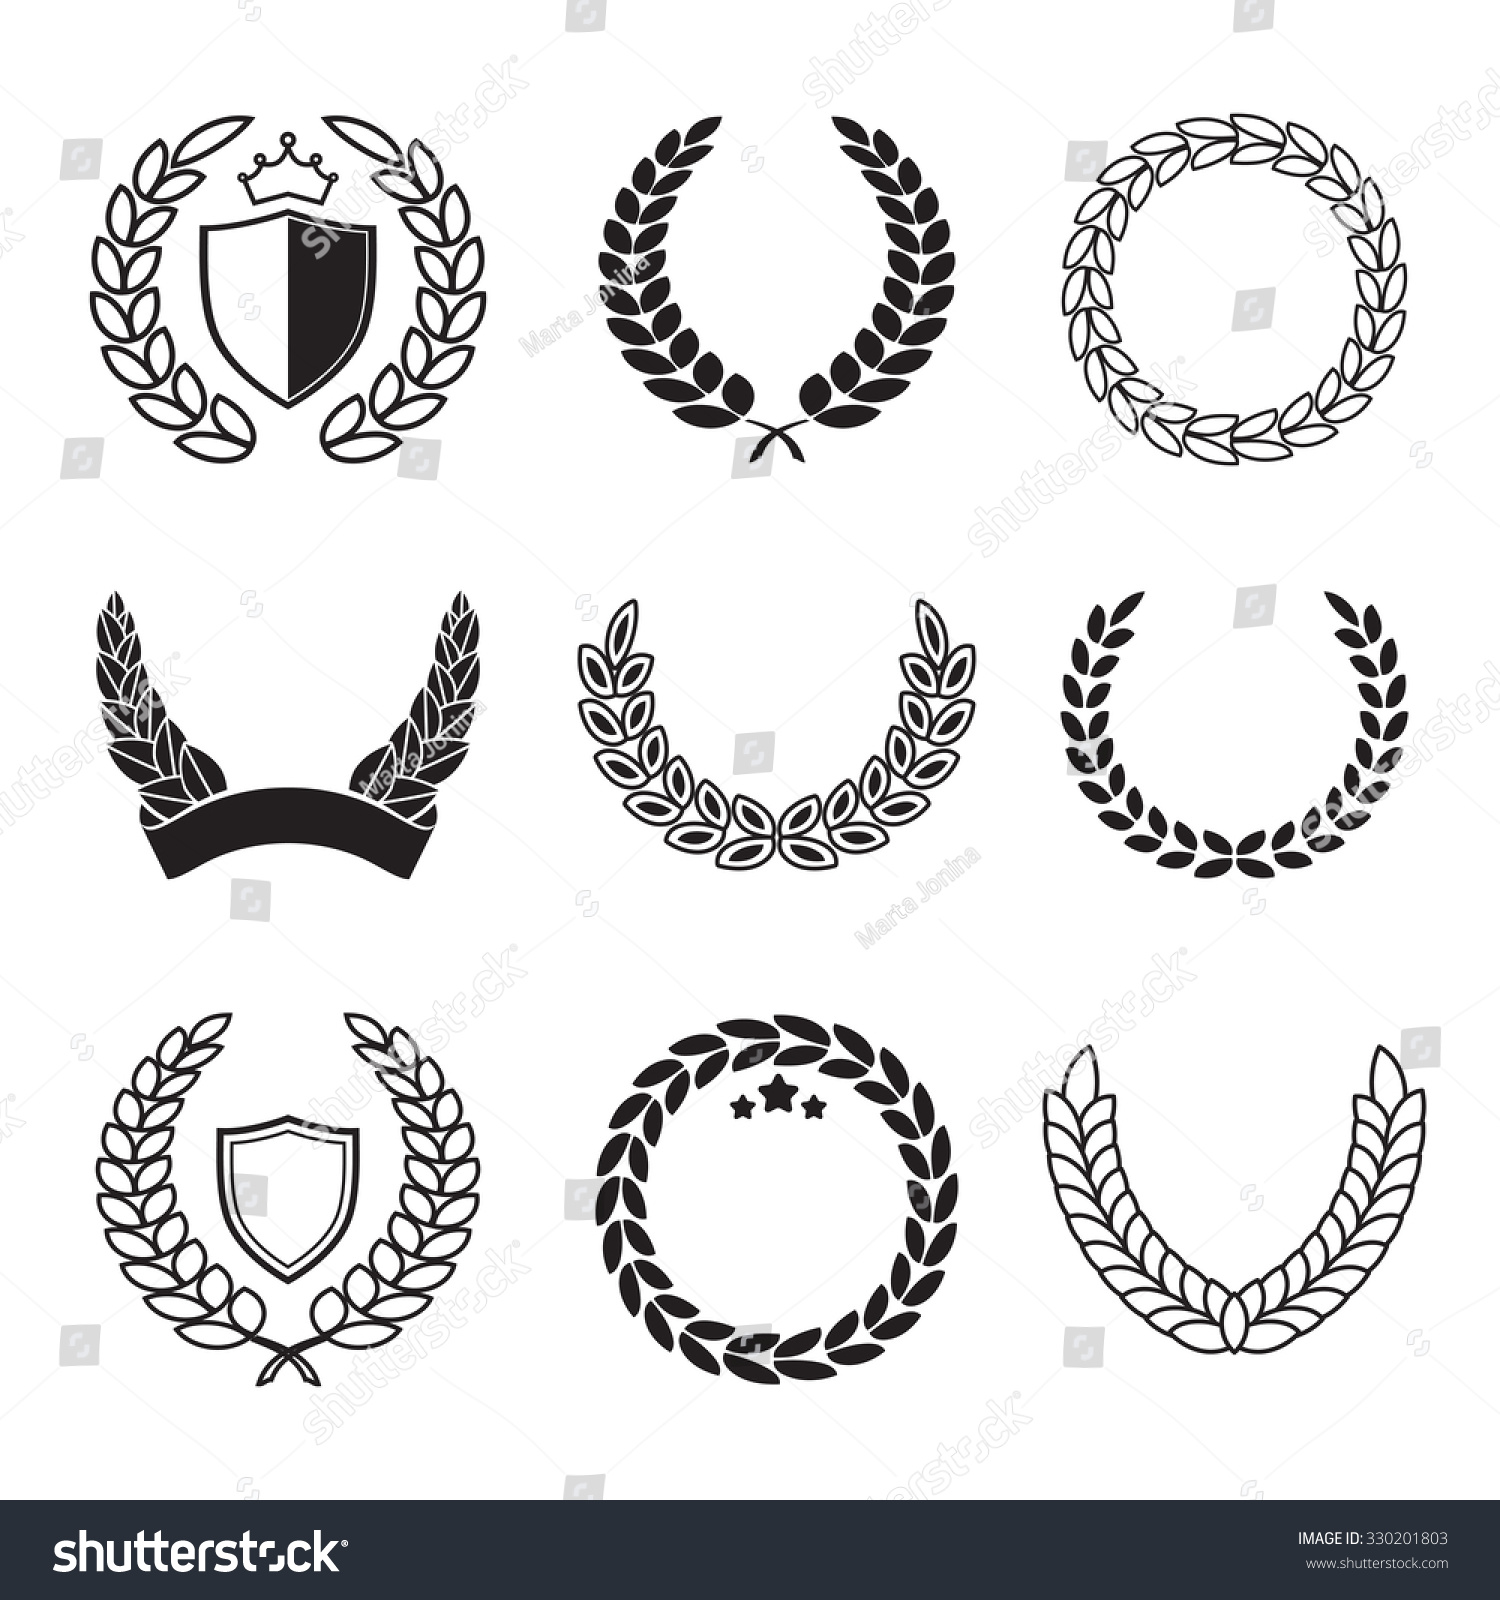 SVG of Silhouette laurel wreaths in different  shapes - half circle, circle with shields, crowns and stars svg